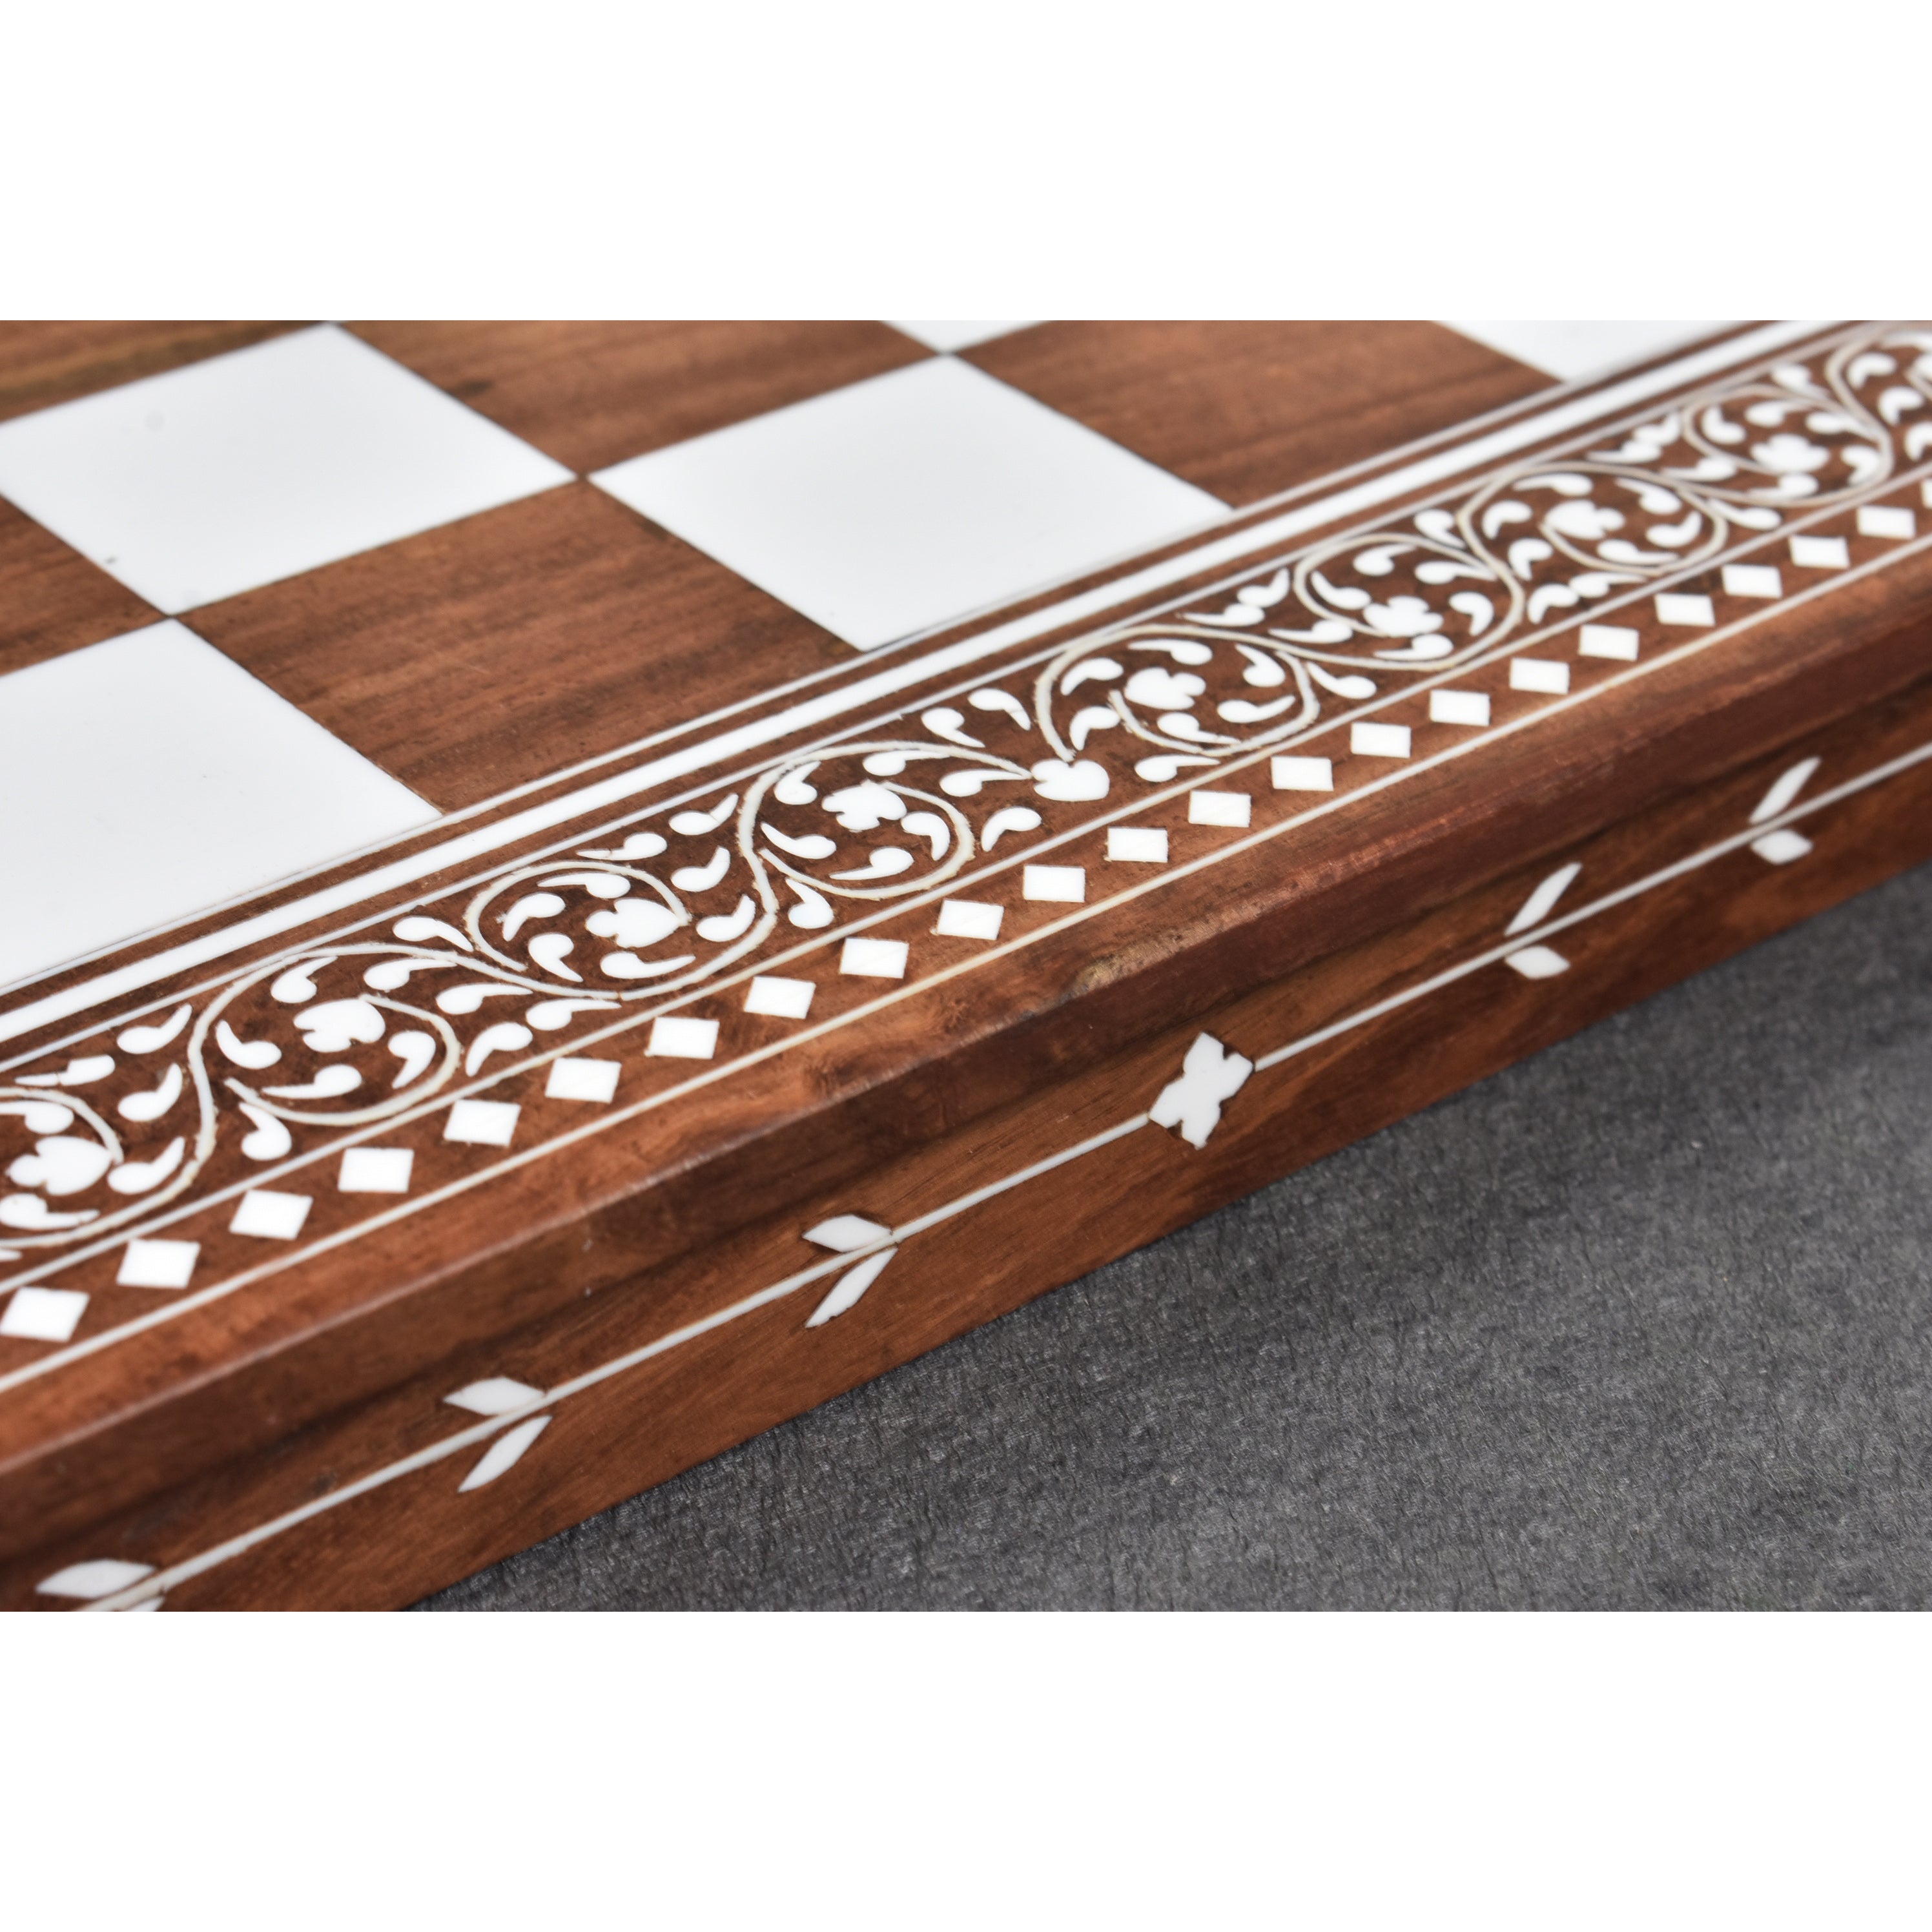 Folding Wooden Chess Board | Wooden Chess Pieces | Luxury Chess Pieces